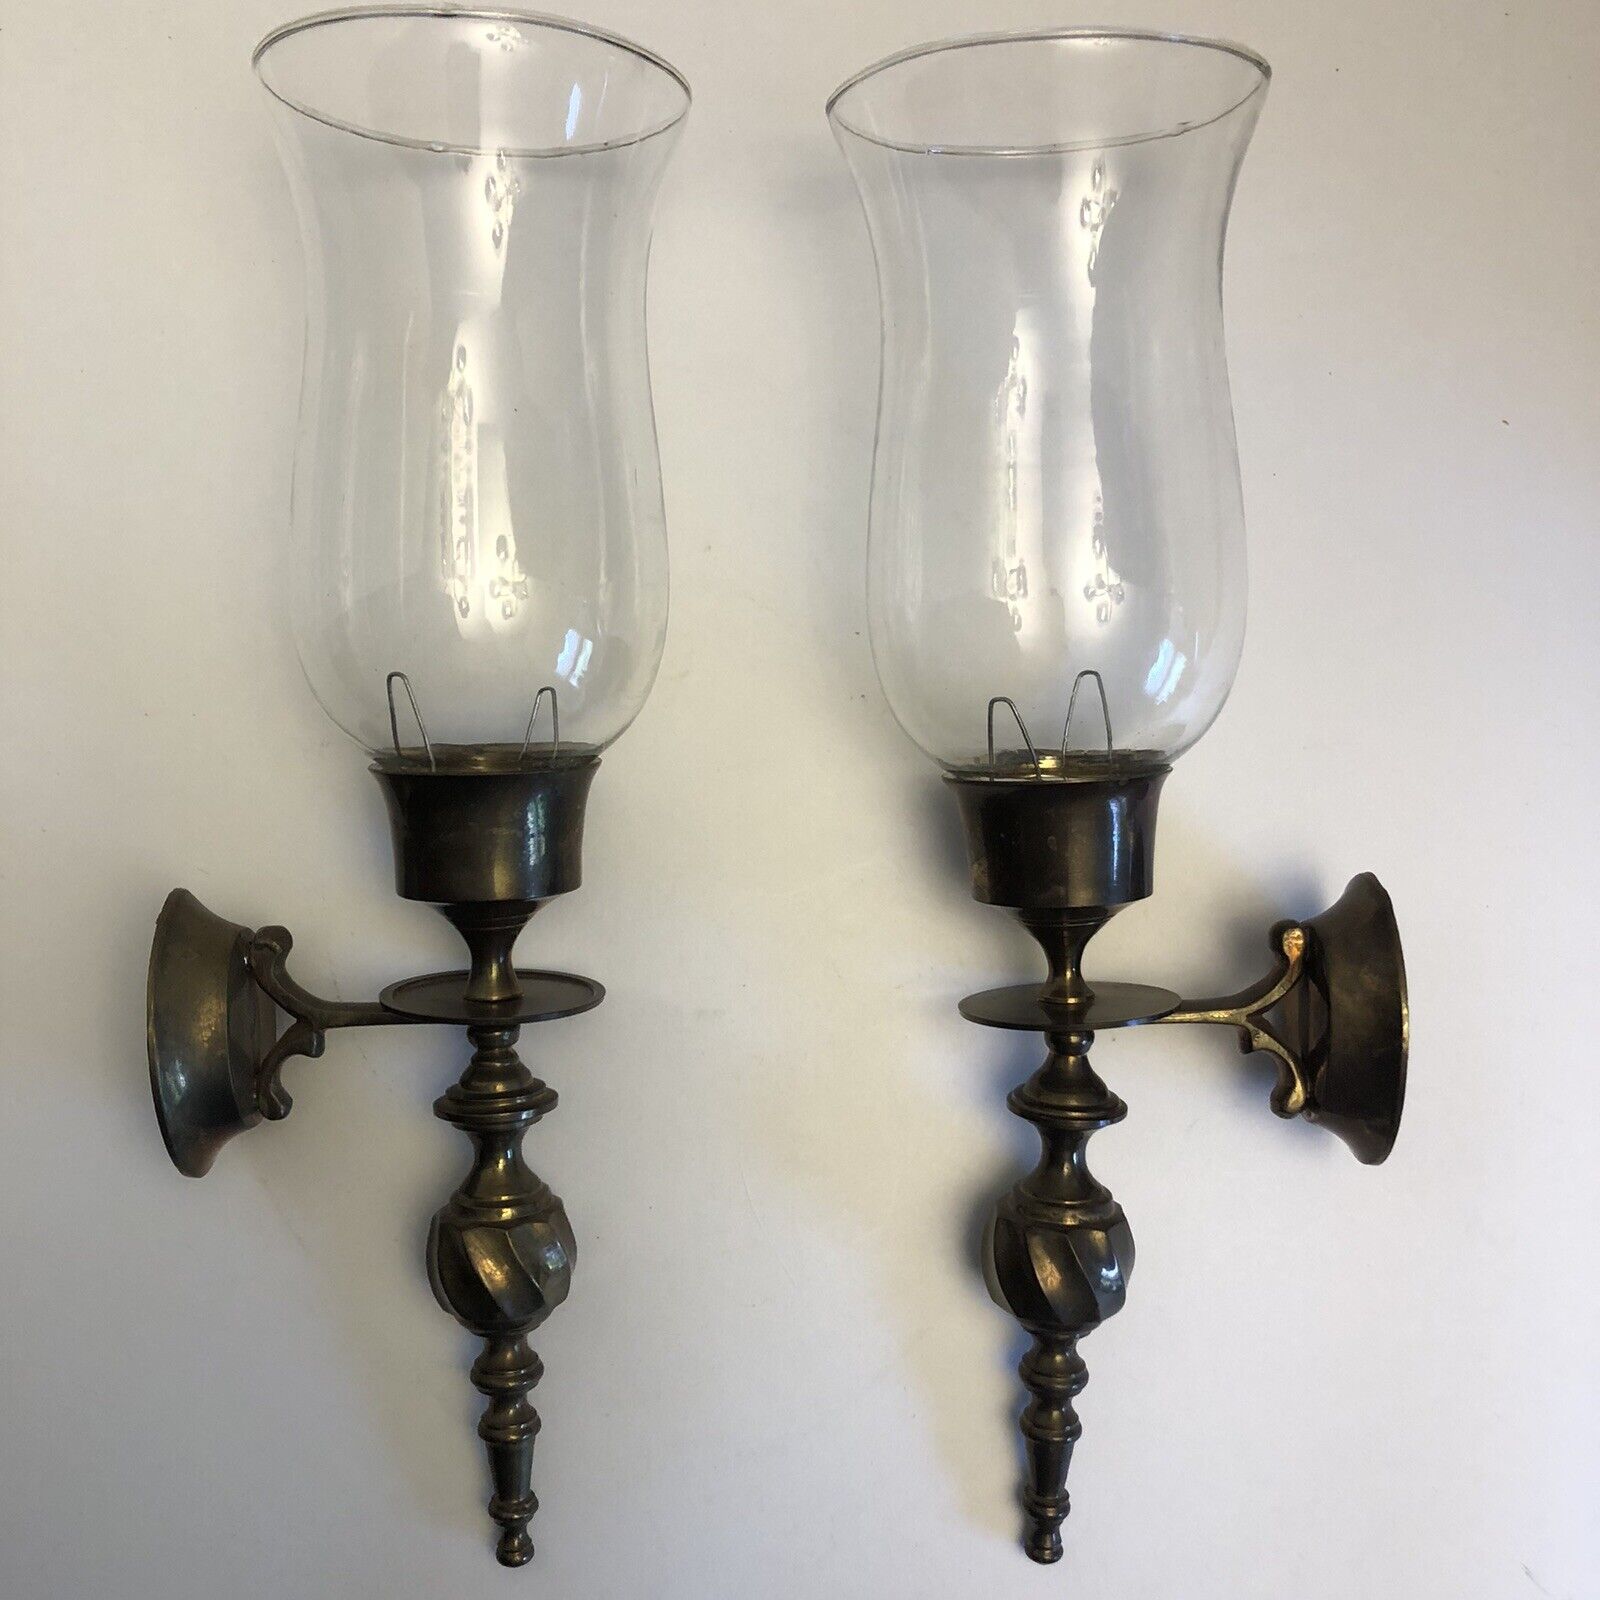 Vintage pair (2) Brass Wall Sconce Candle Holder w/Hurricane Glass Shade.